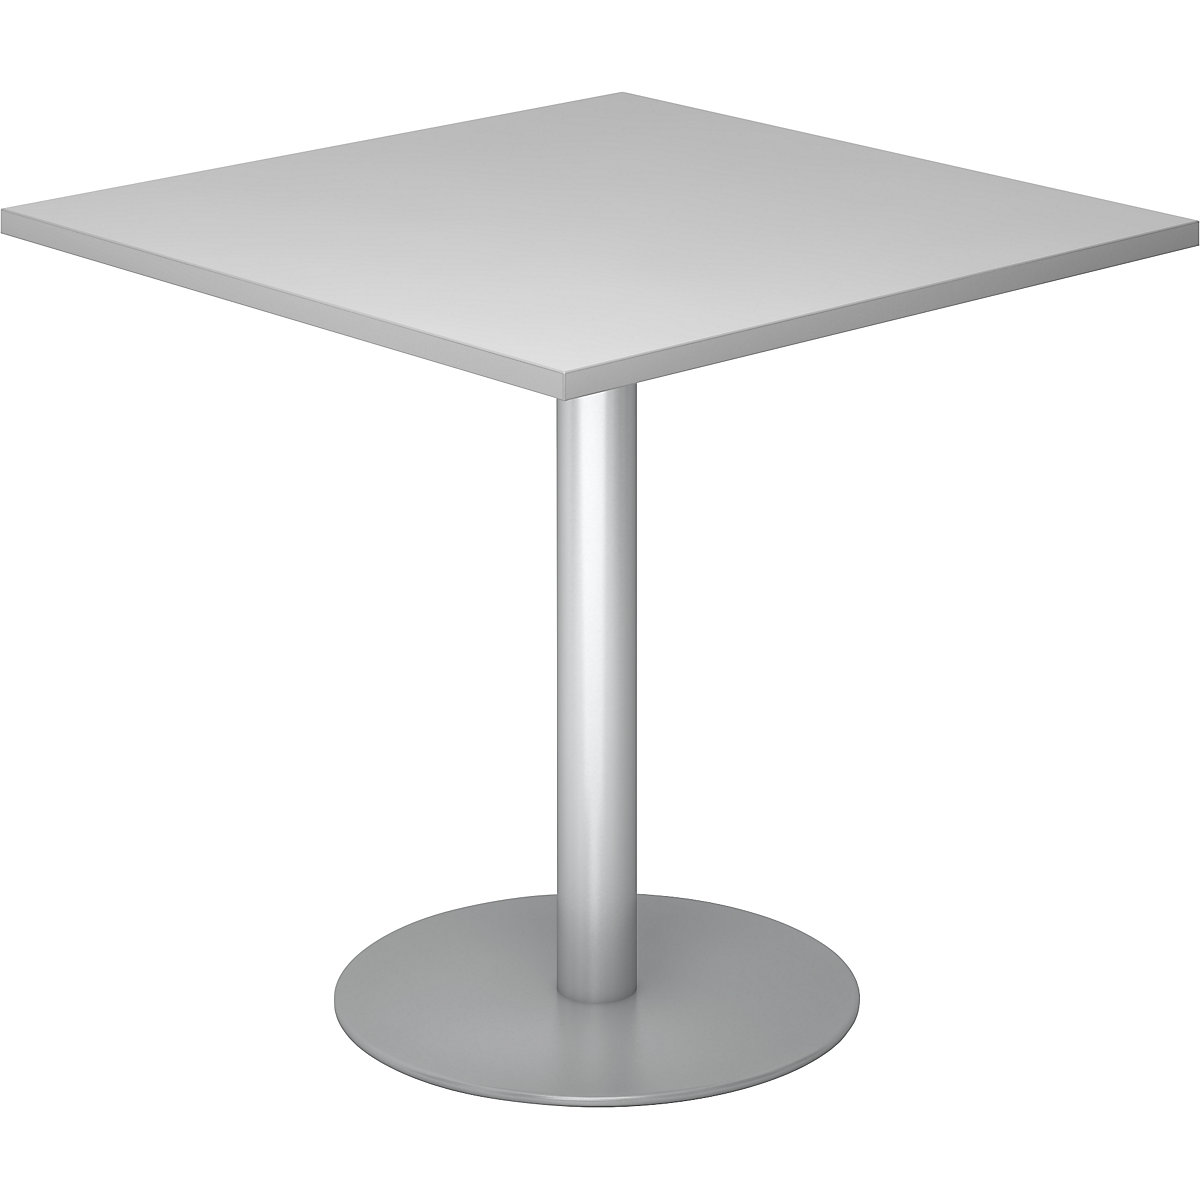 Conference table, LxW 800 x 800 mm, 755 mm high, silver frame, tabletop in light grey-5